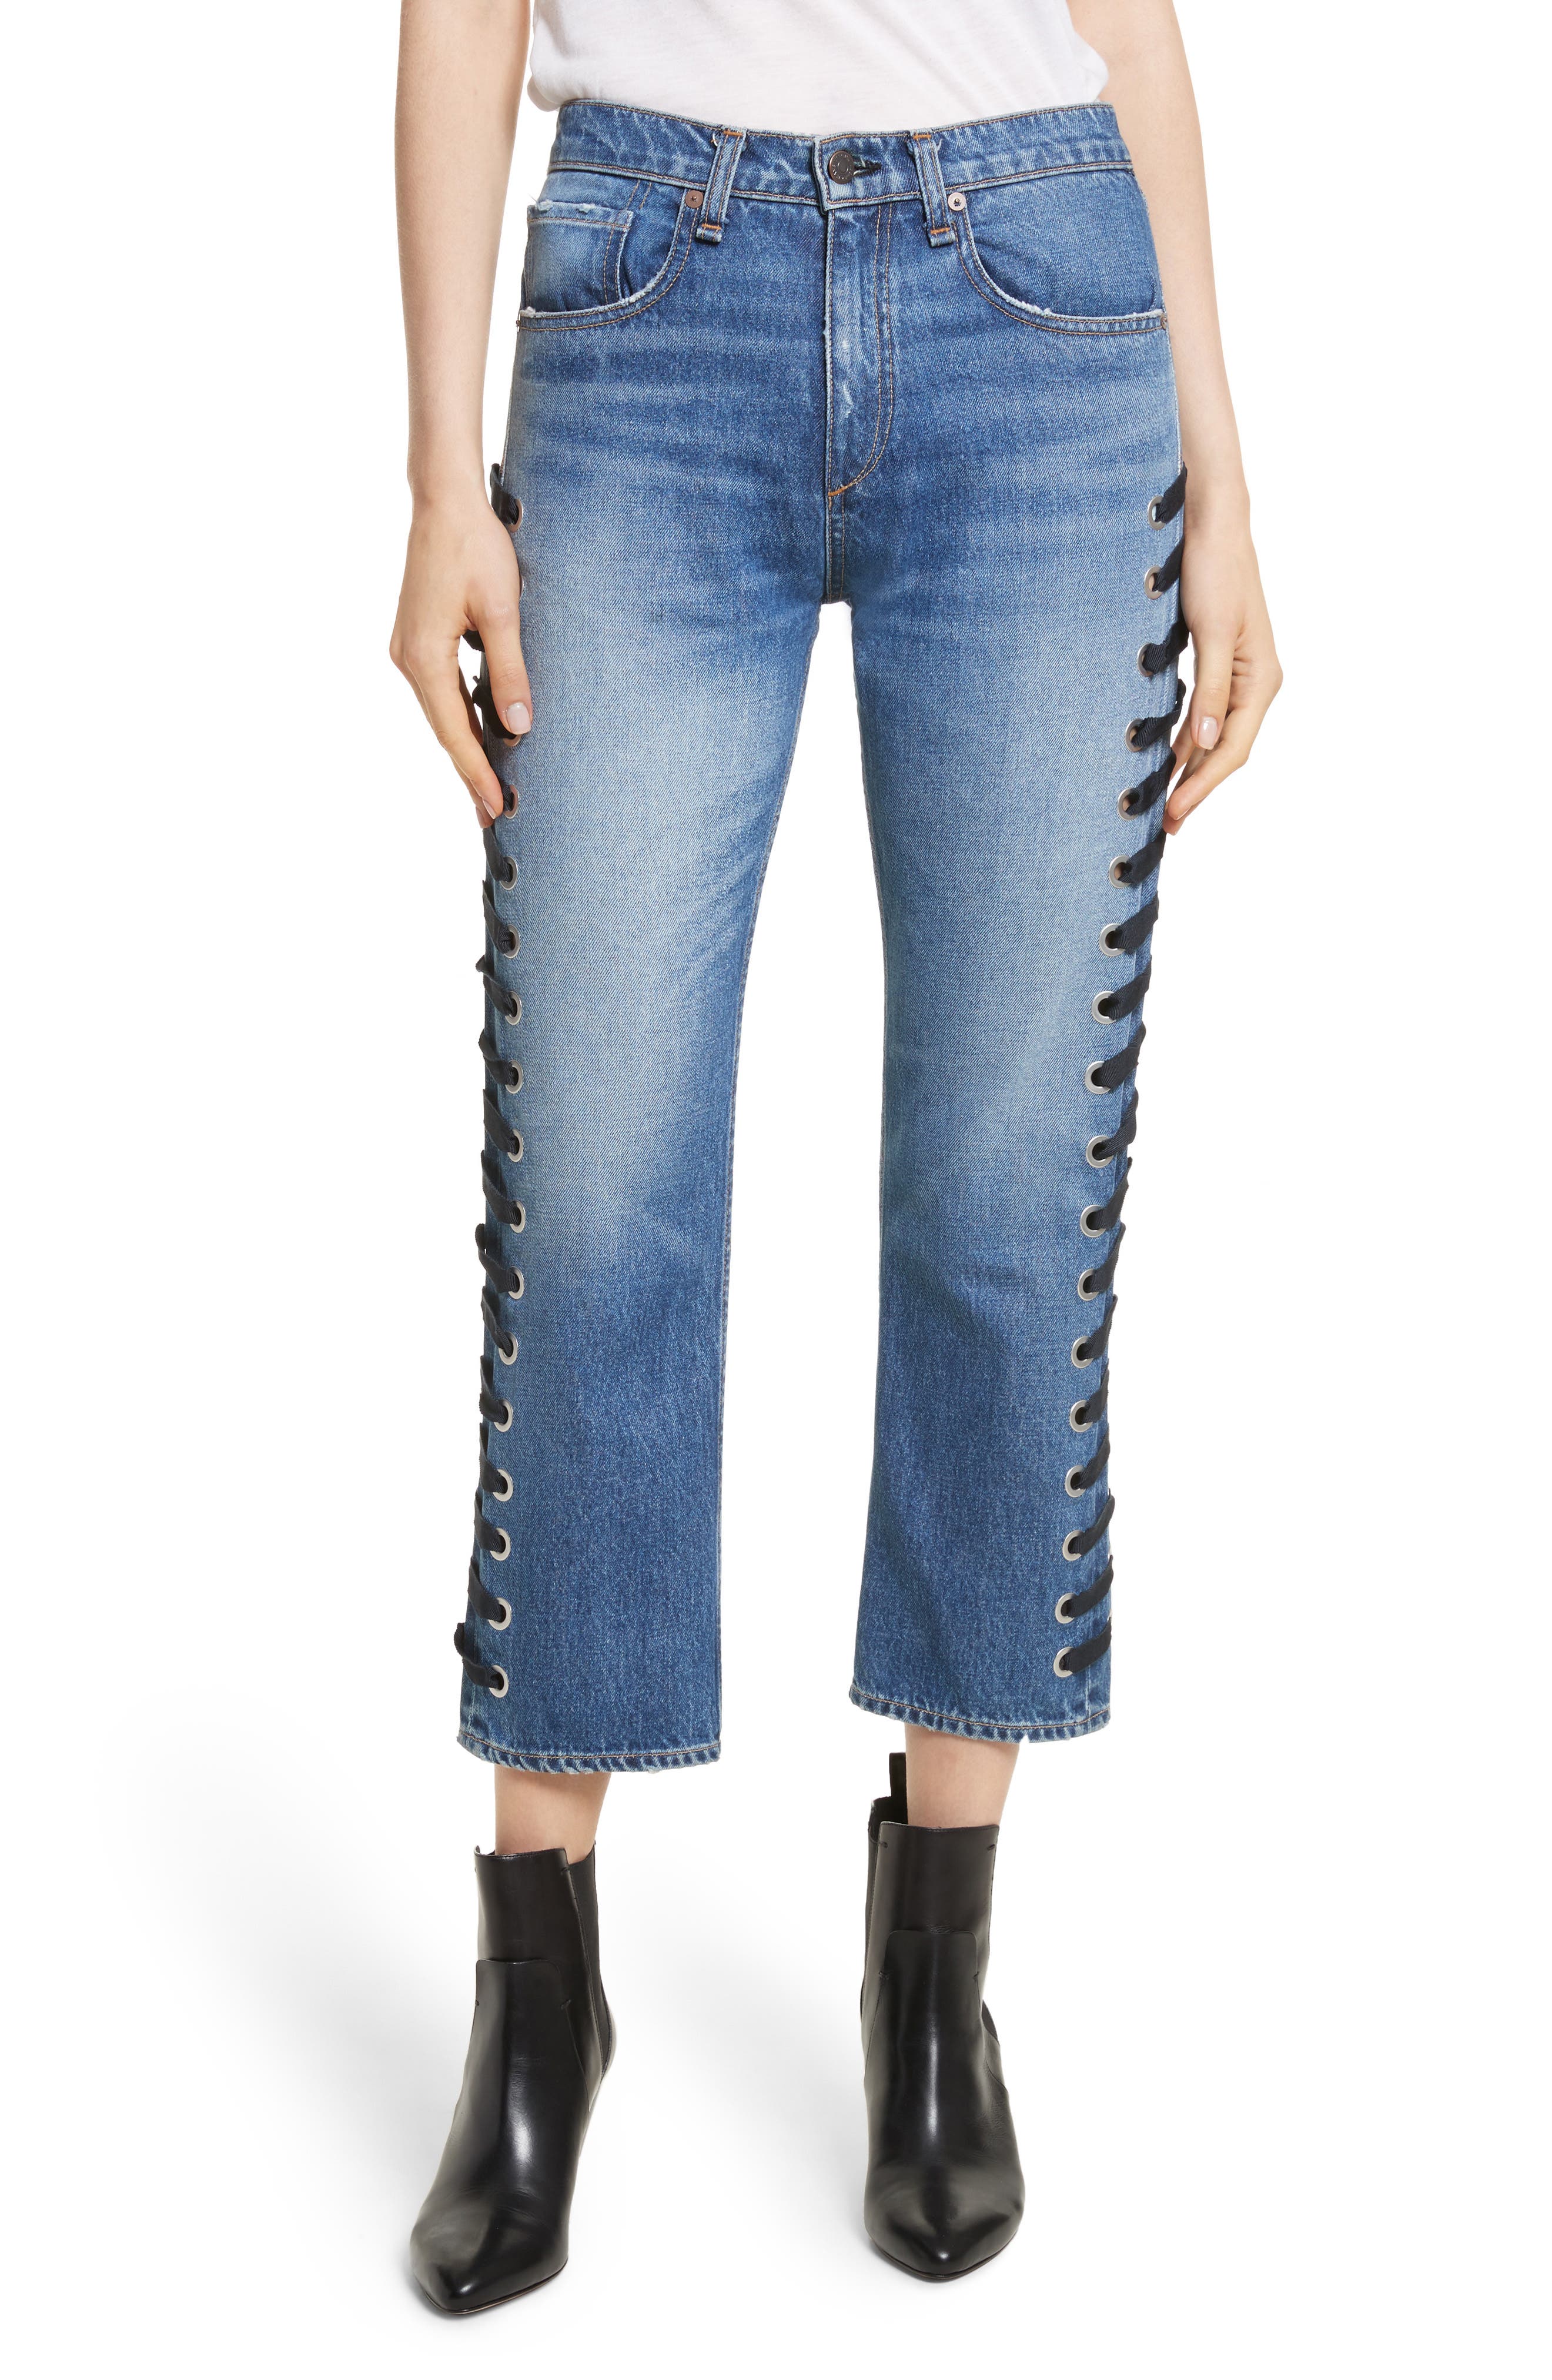 veronica beard lace up jeans